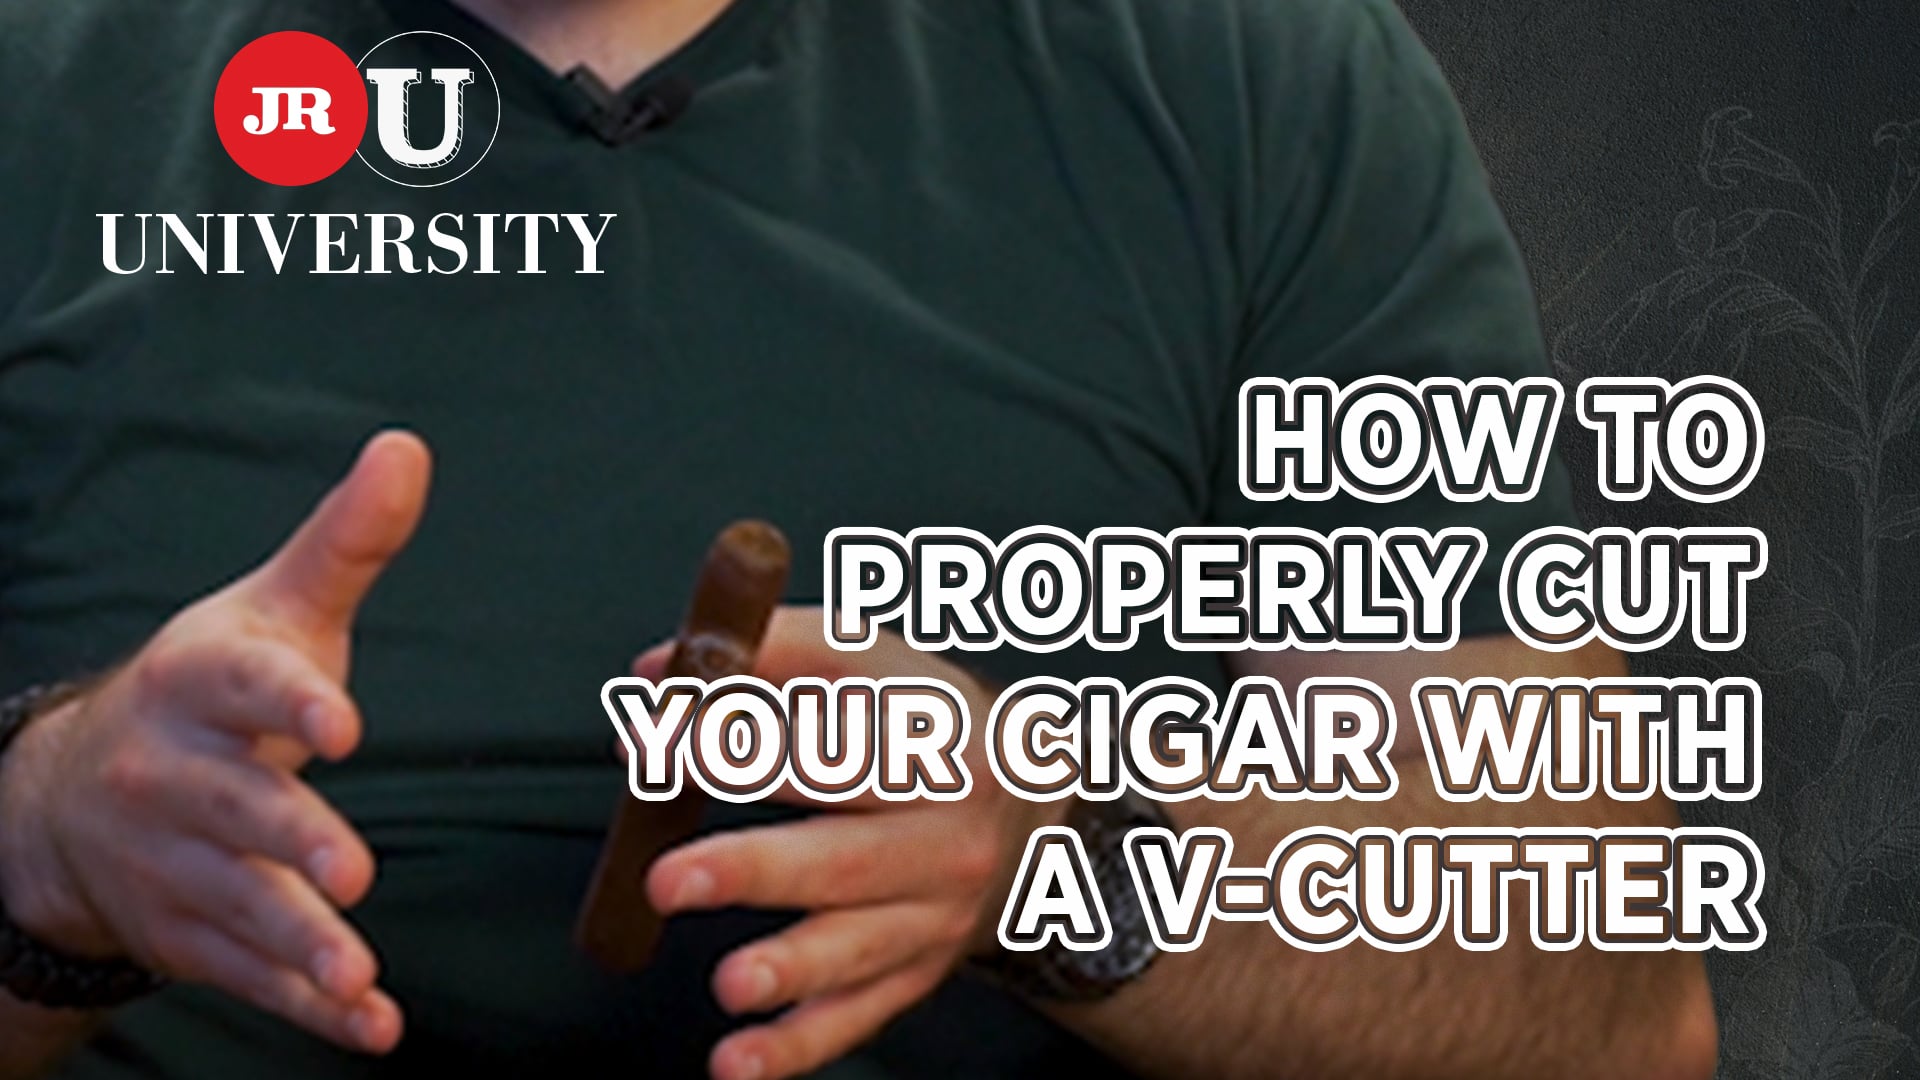 How to Properly Cut a cigar with a V-Cutter on Vimeo